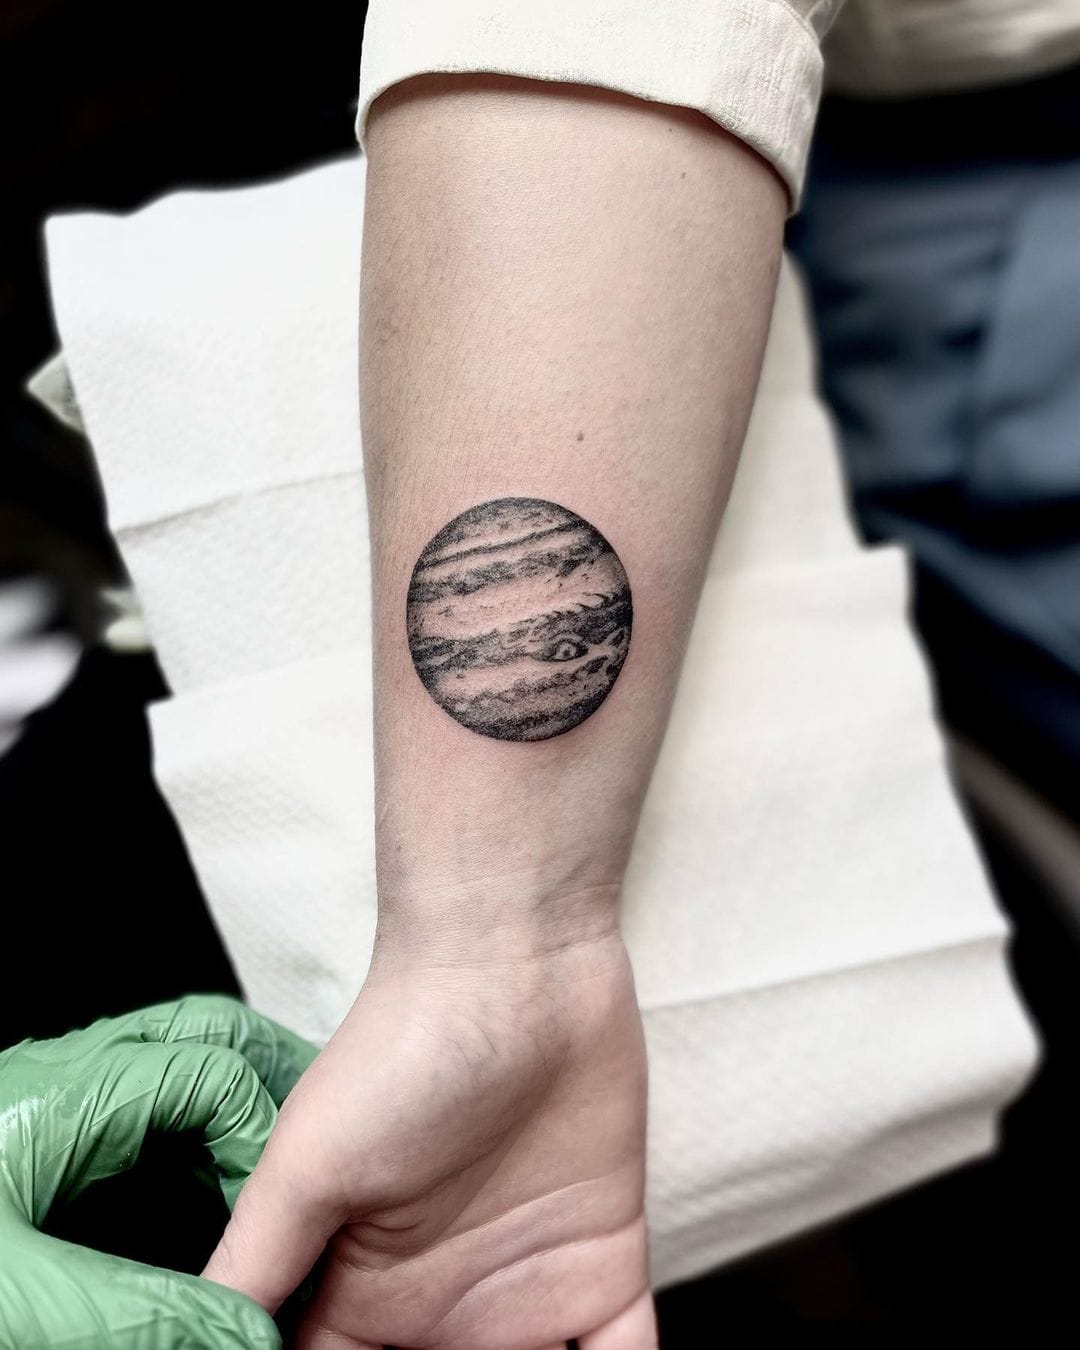 101 Best Jupiter Tattoo Ideas You Have To See To Believe!